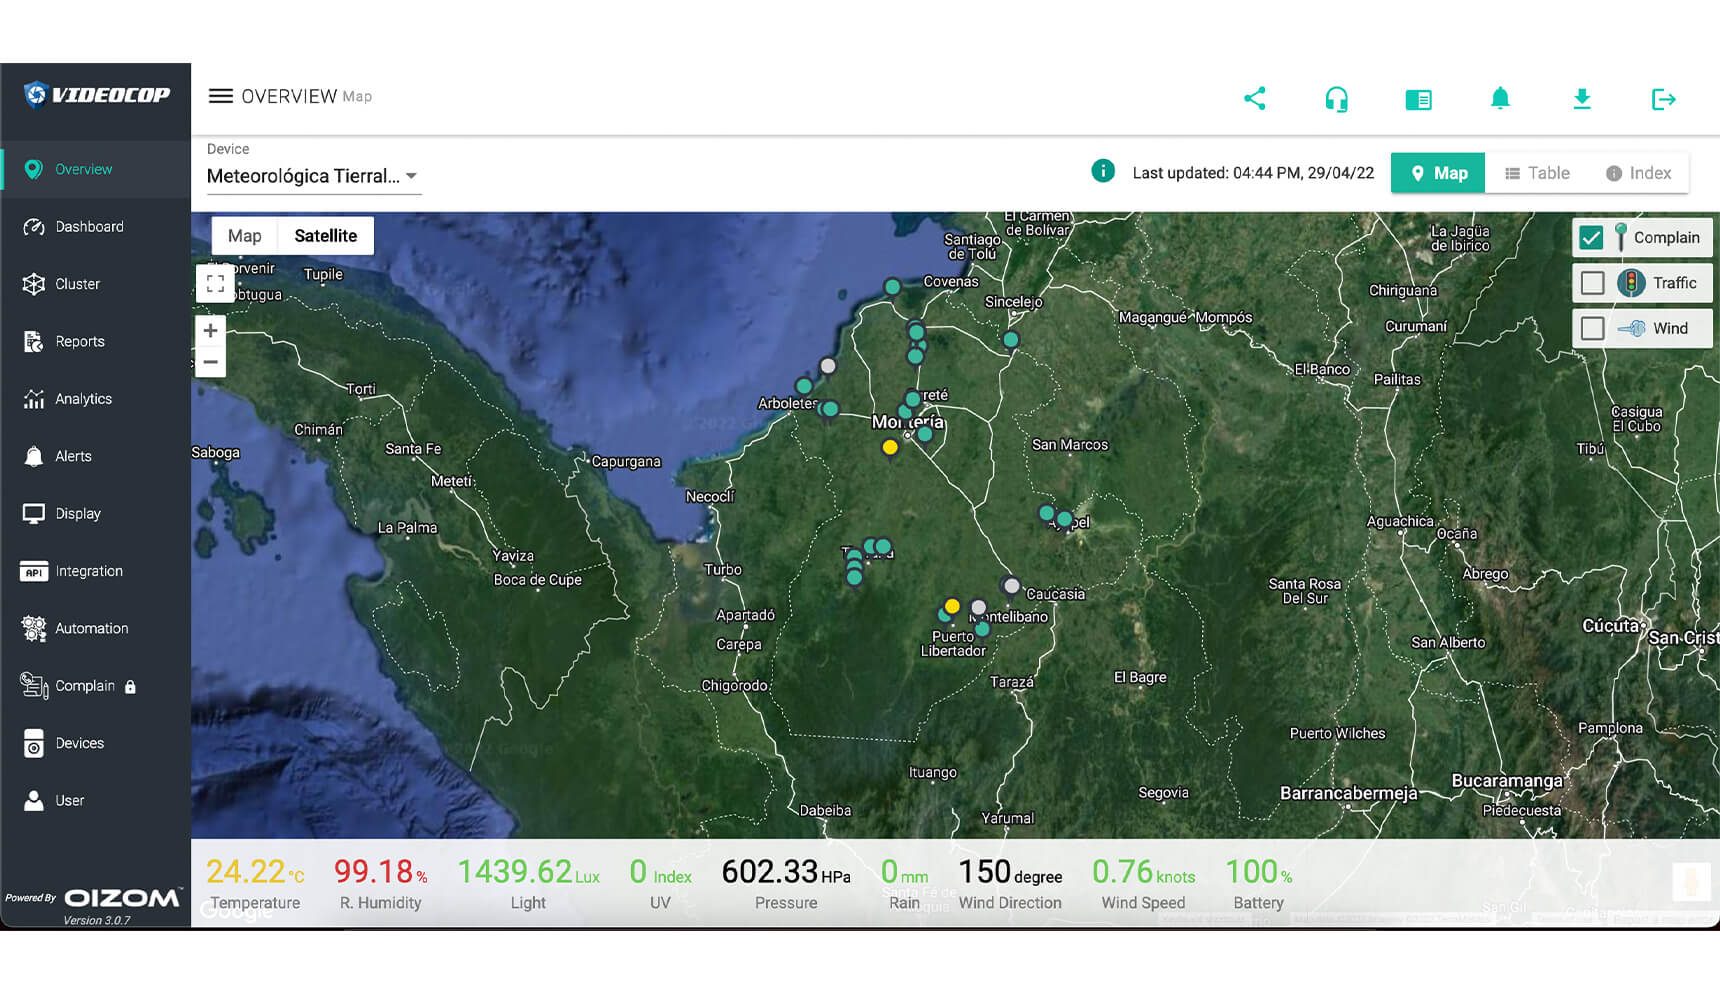 Flood monitoring in Colombia